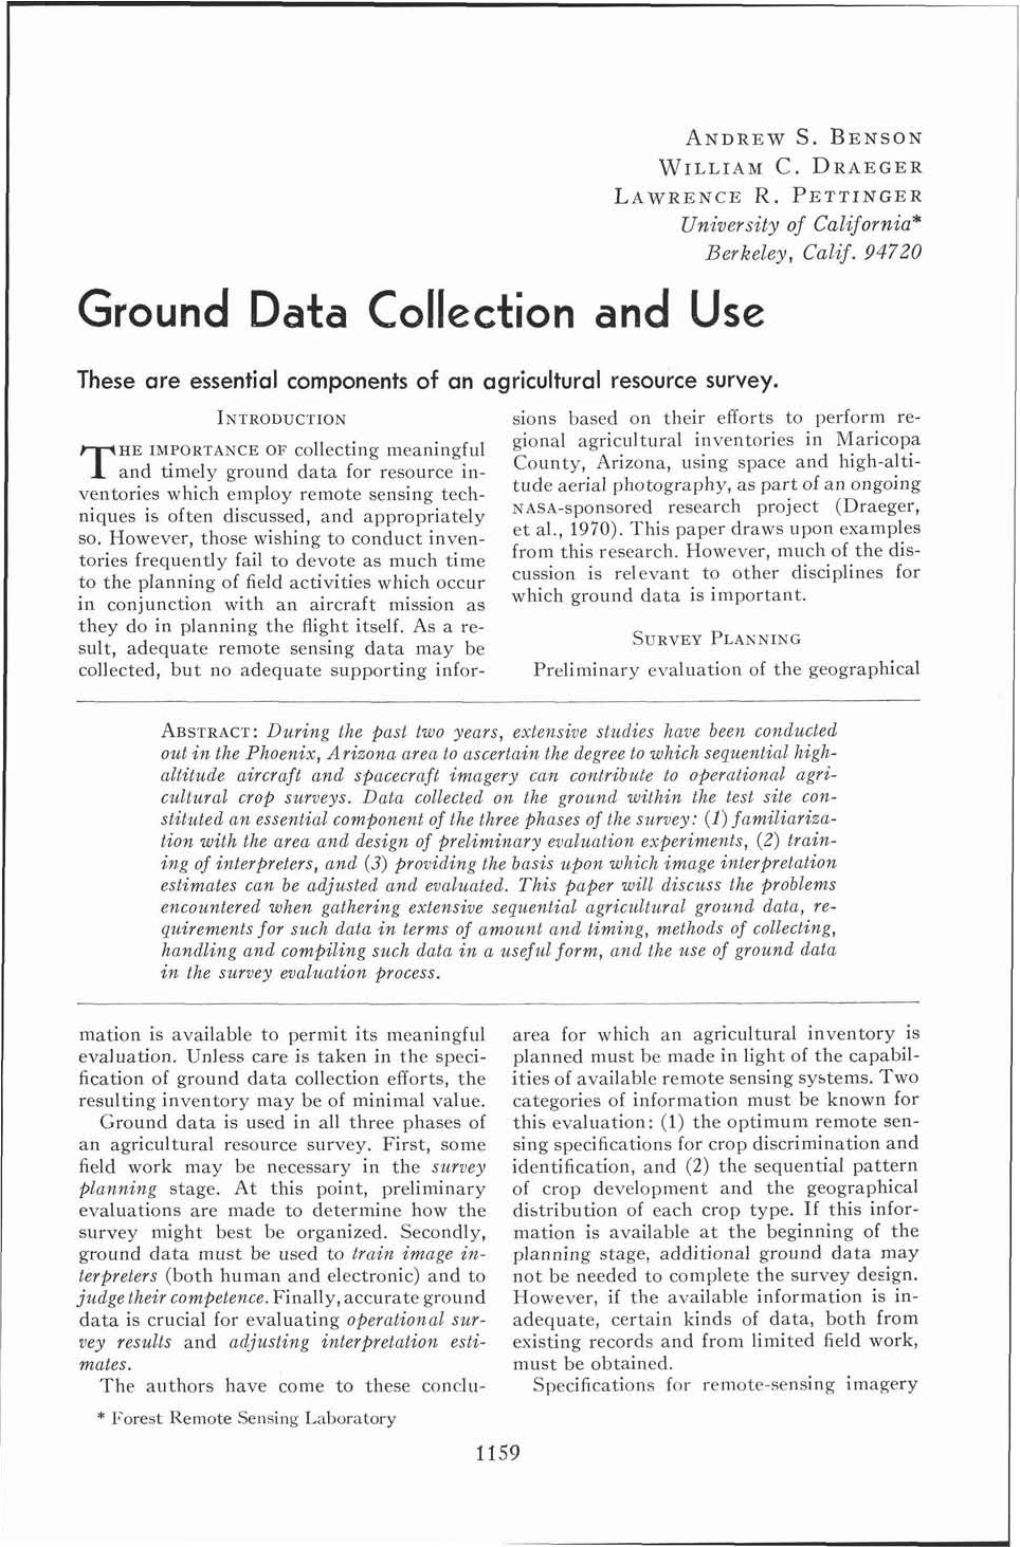 Ground Data Collection and Use